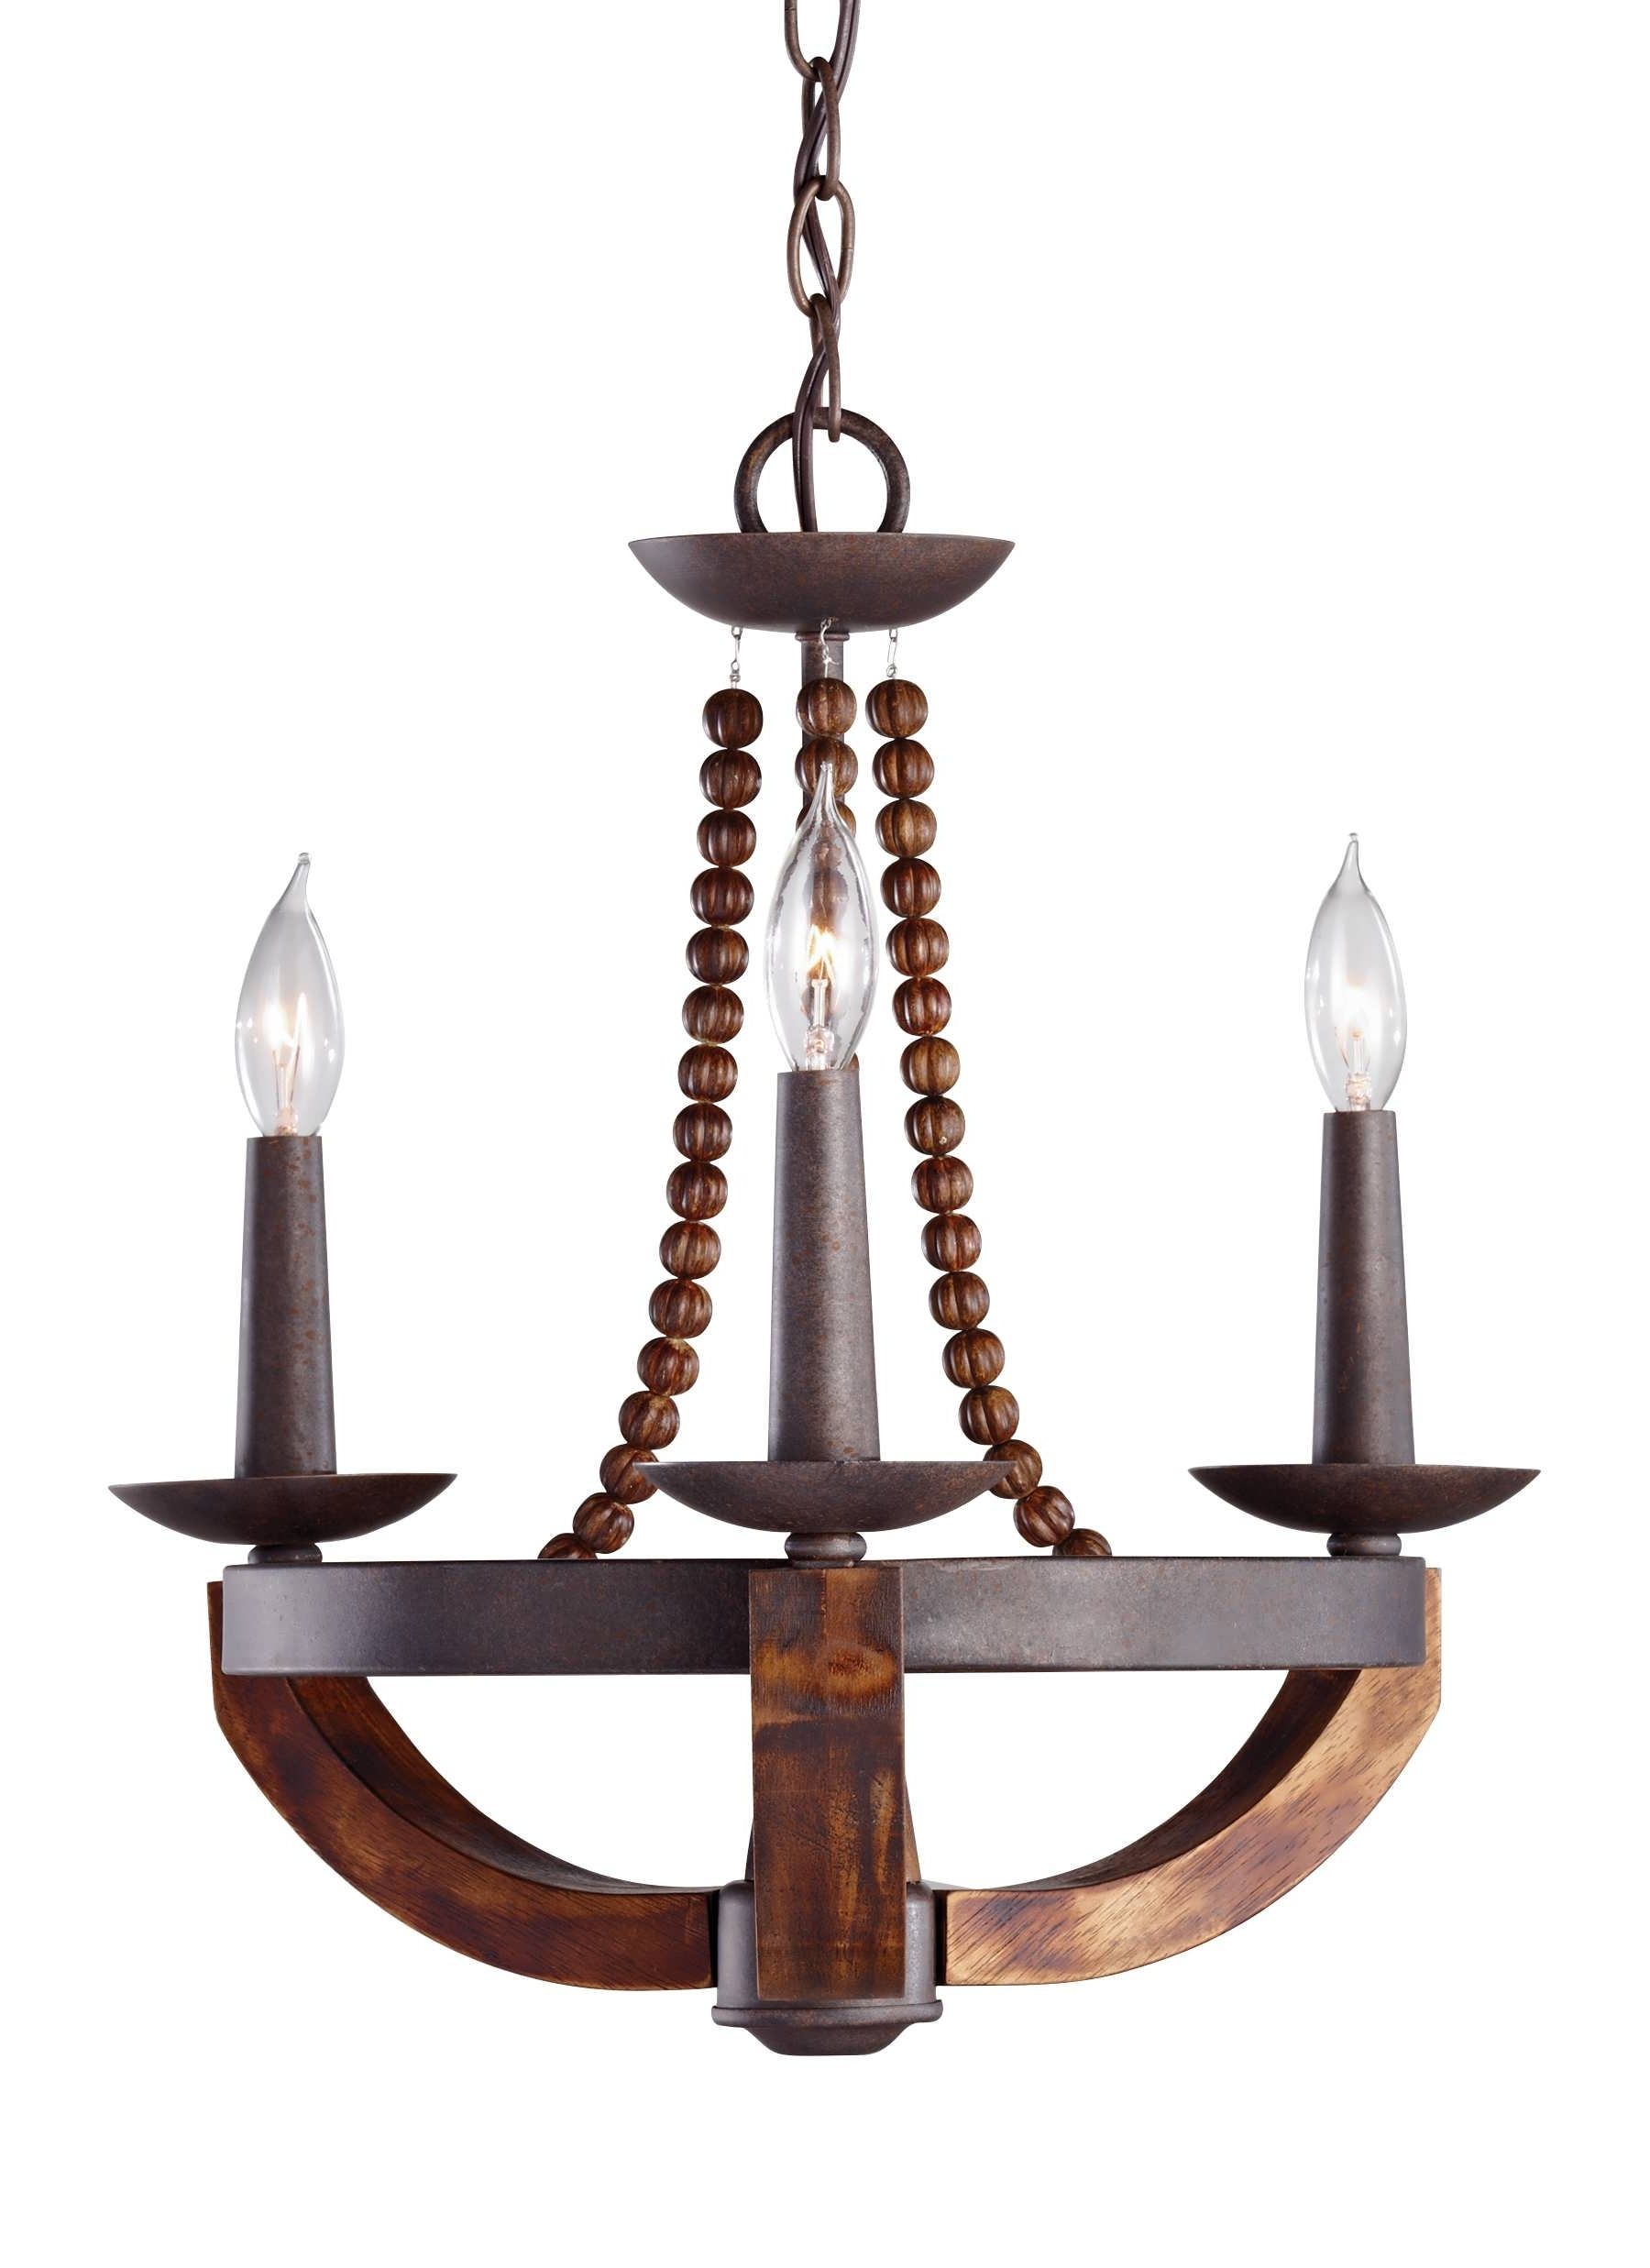 2019 Chandelier : Extra Large Rustic Chandeliers Iron Chandelier Wood And Intended For Small Rustic Chandeliers (View 7 of 20)